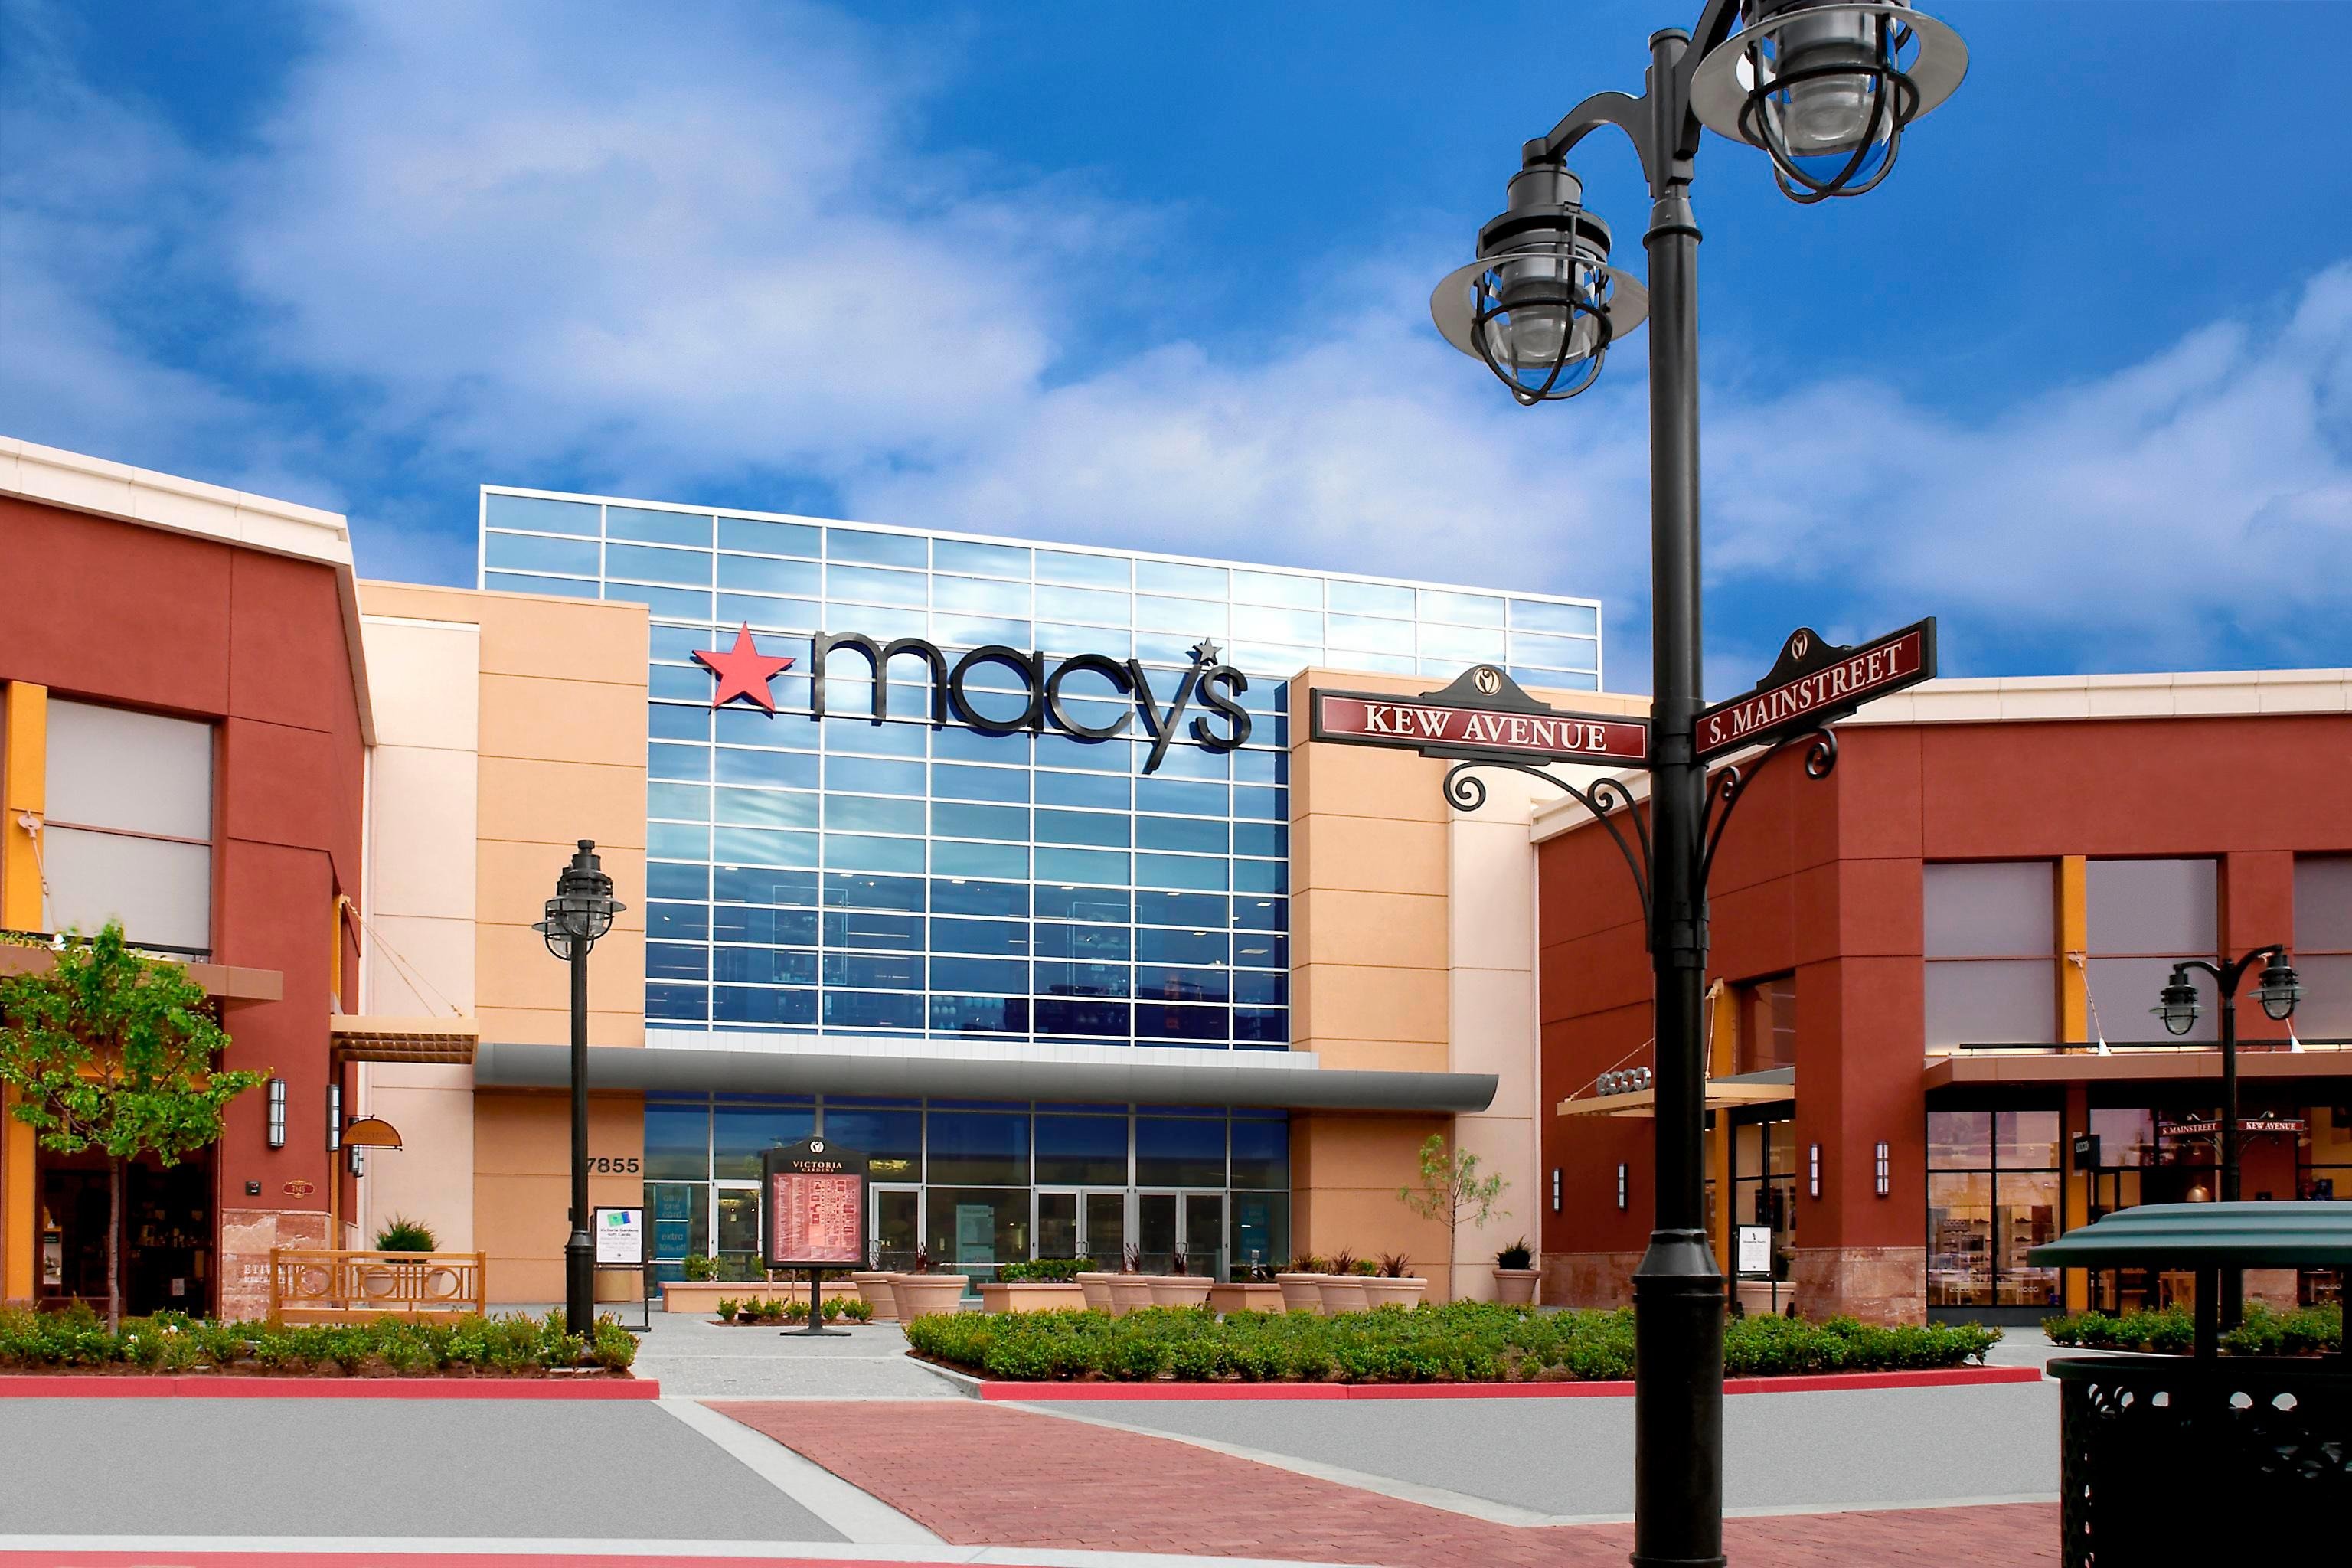 Macy's Victoria Gardens: Clothing, Shoes, Jewelry - Department Store in  Rancho Cucamonga, CA